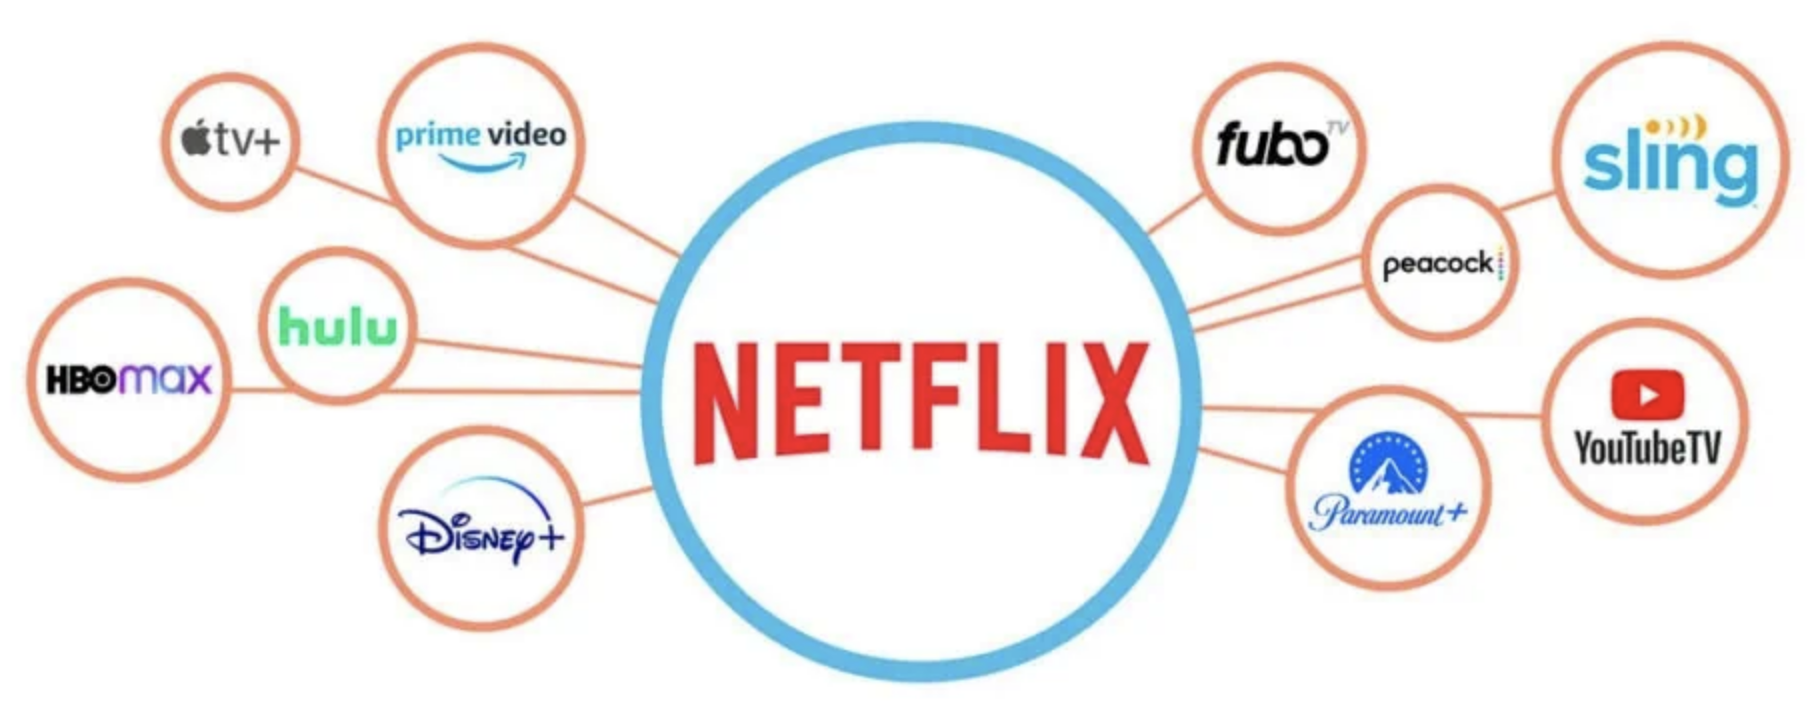 Fubo Stock — A Winner or Loser in Streaming Services?